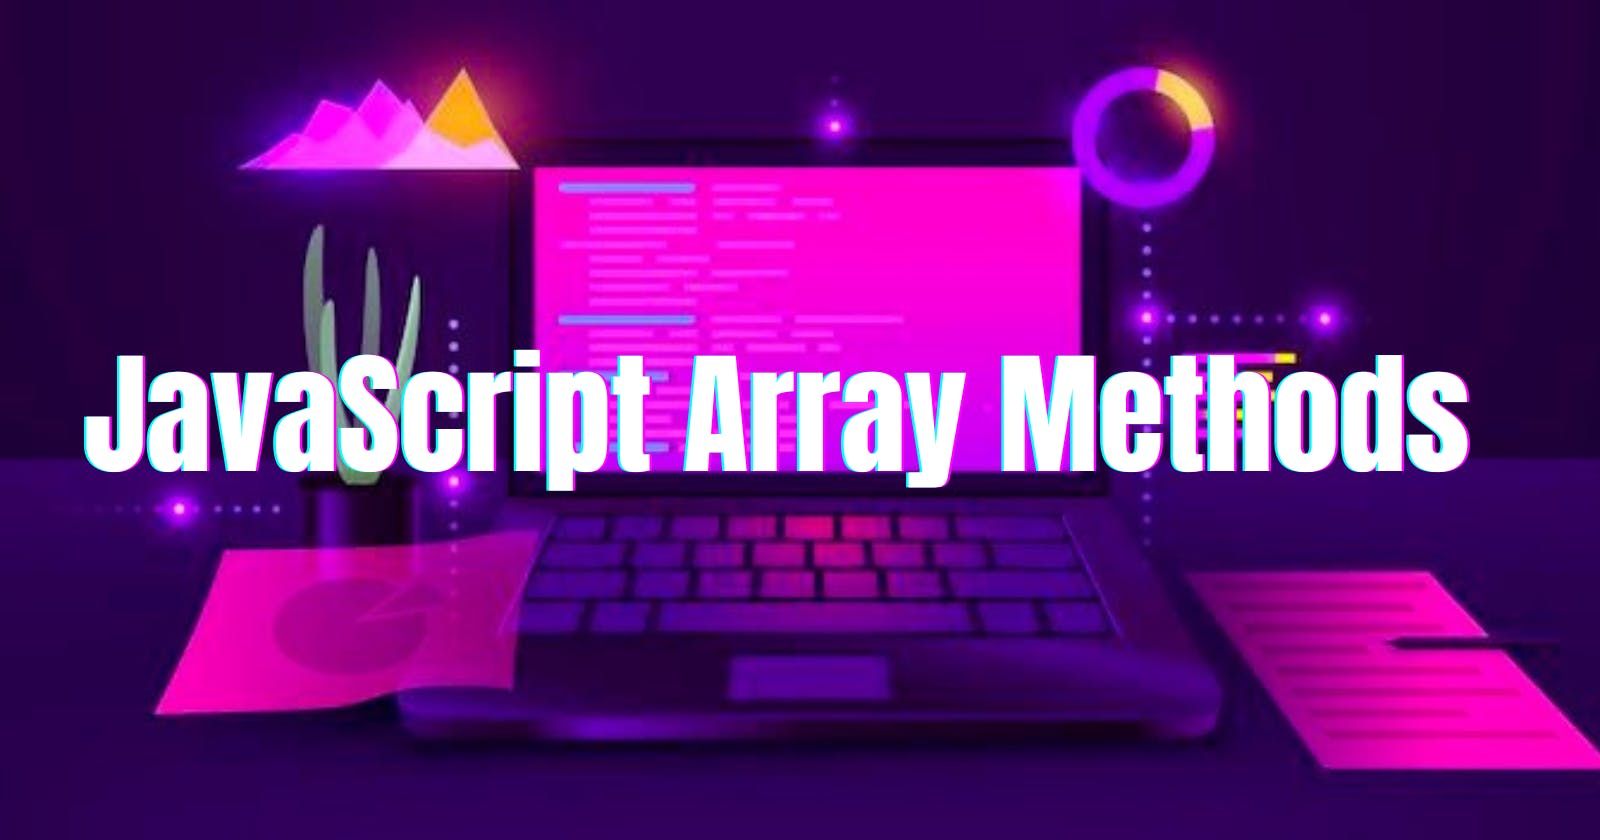 Don't start learning JavaScript without learning these Array Methods